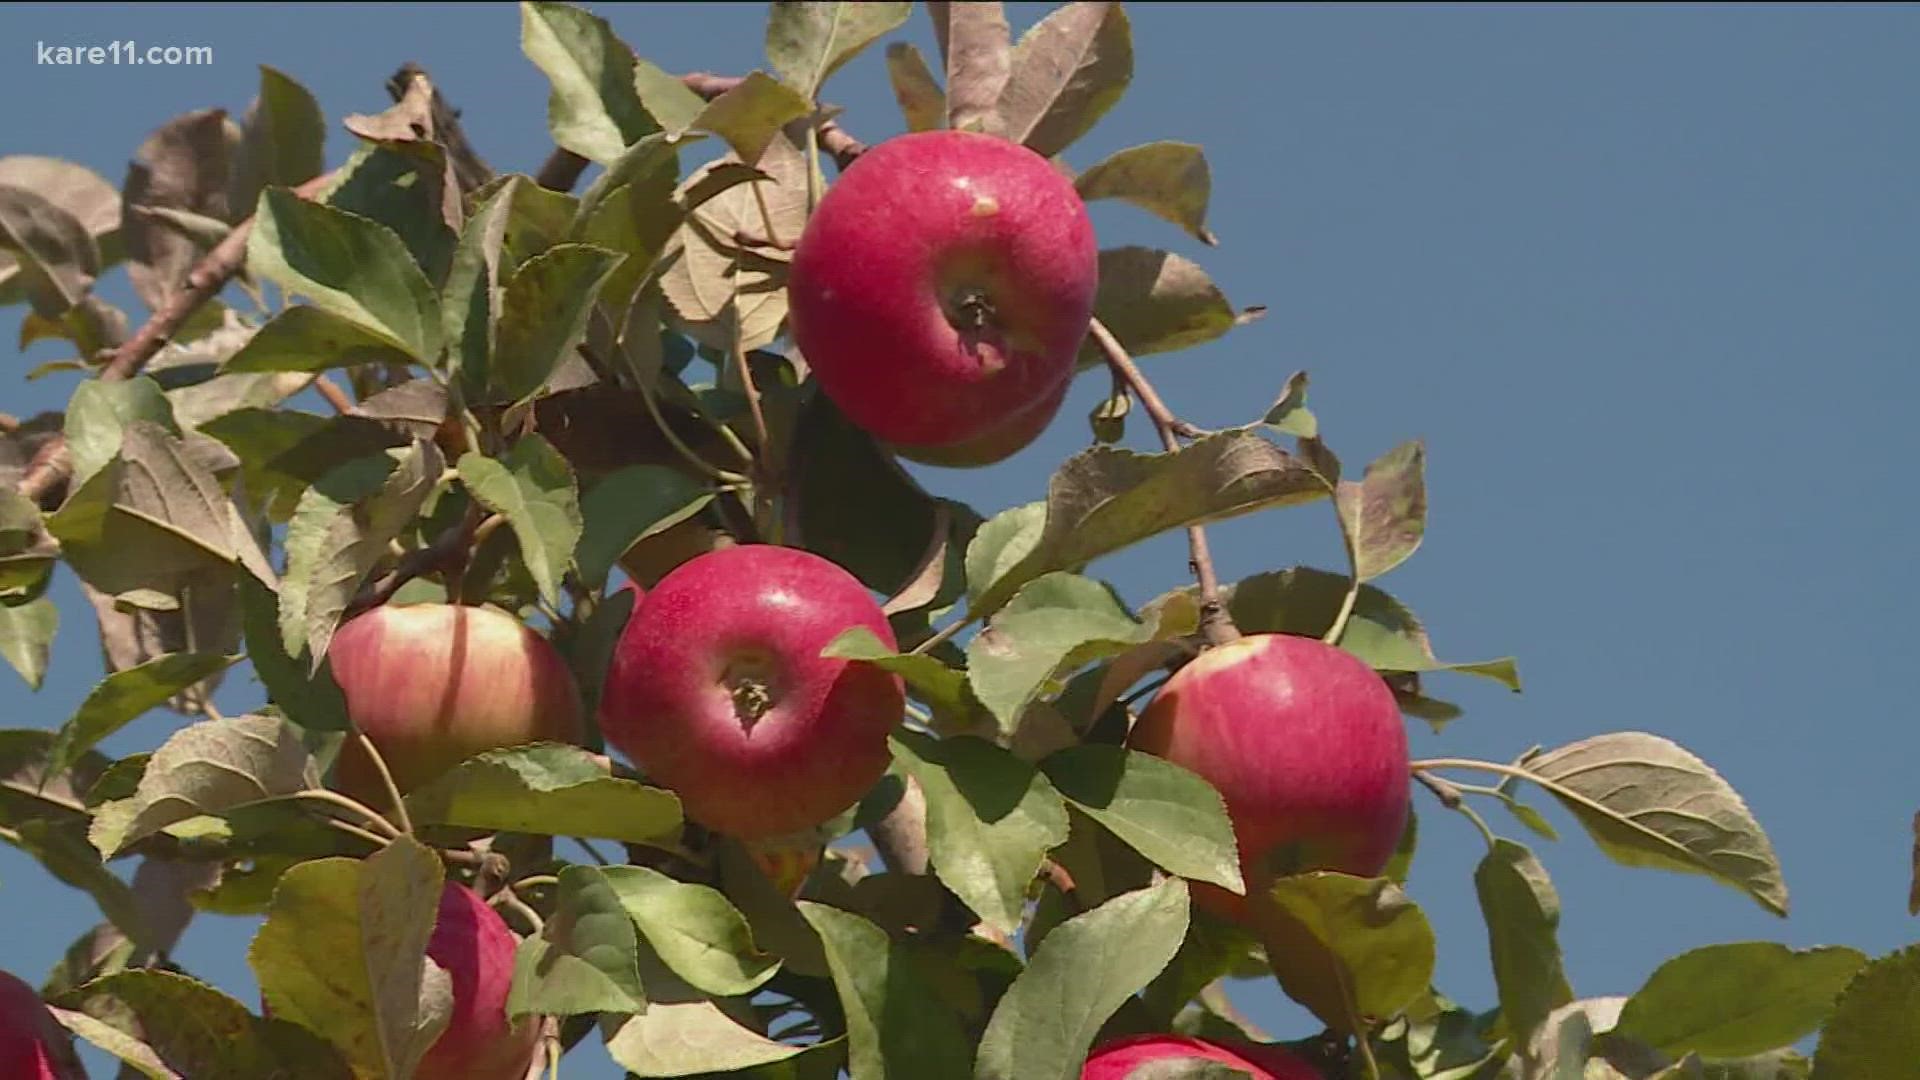 The national labor shortage is also impacting Minnesota apple orchards. An orchard in Delano is down about 50 employees.